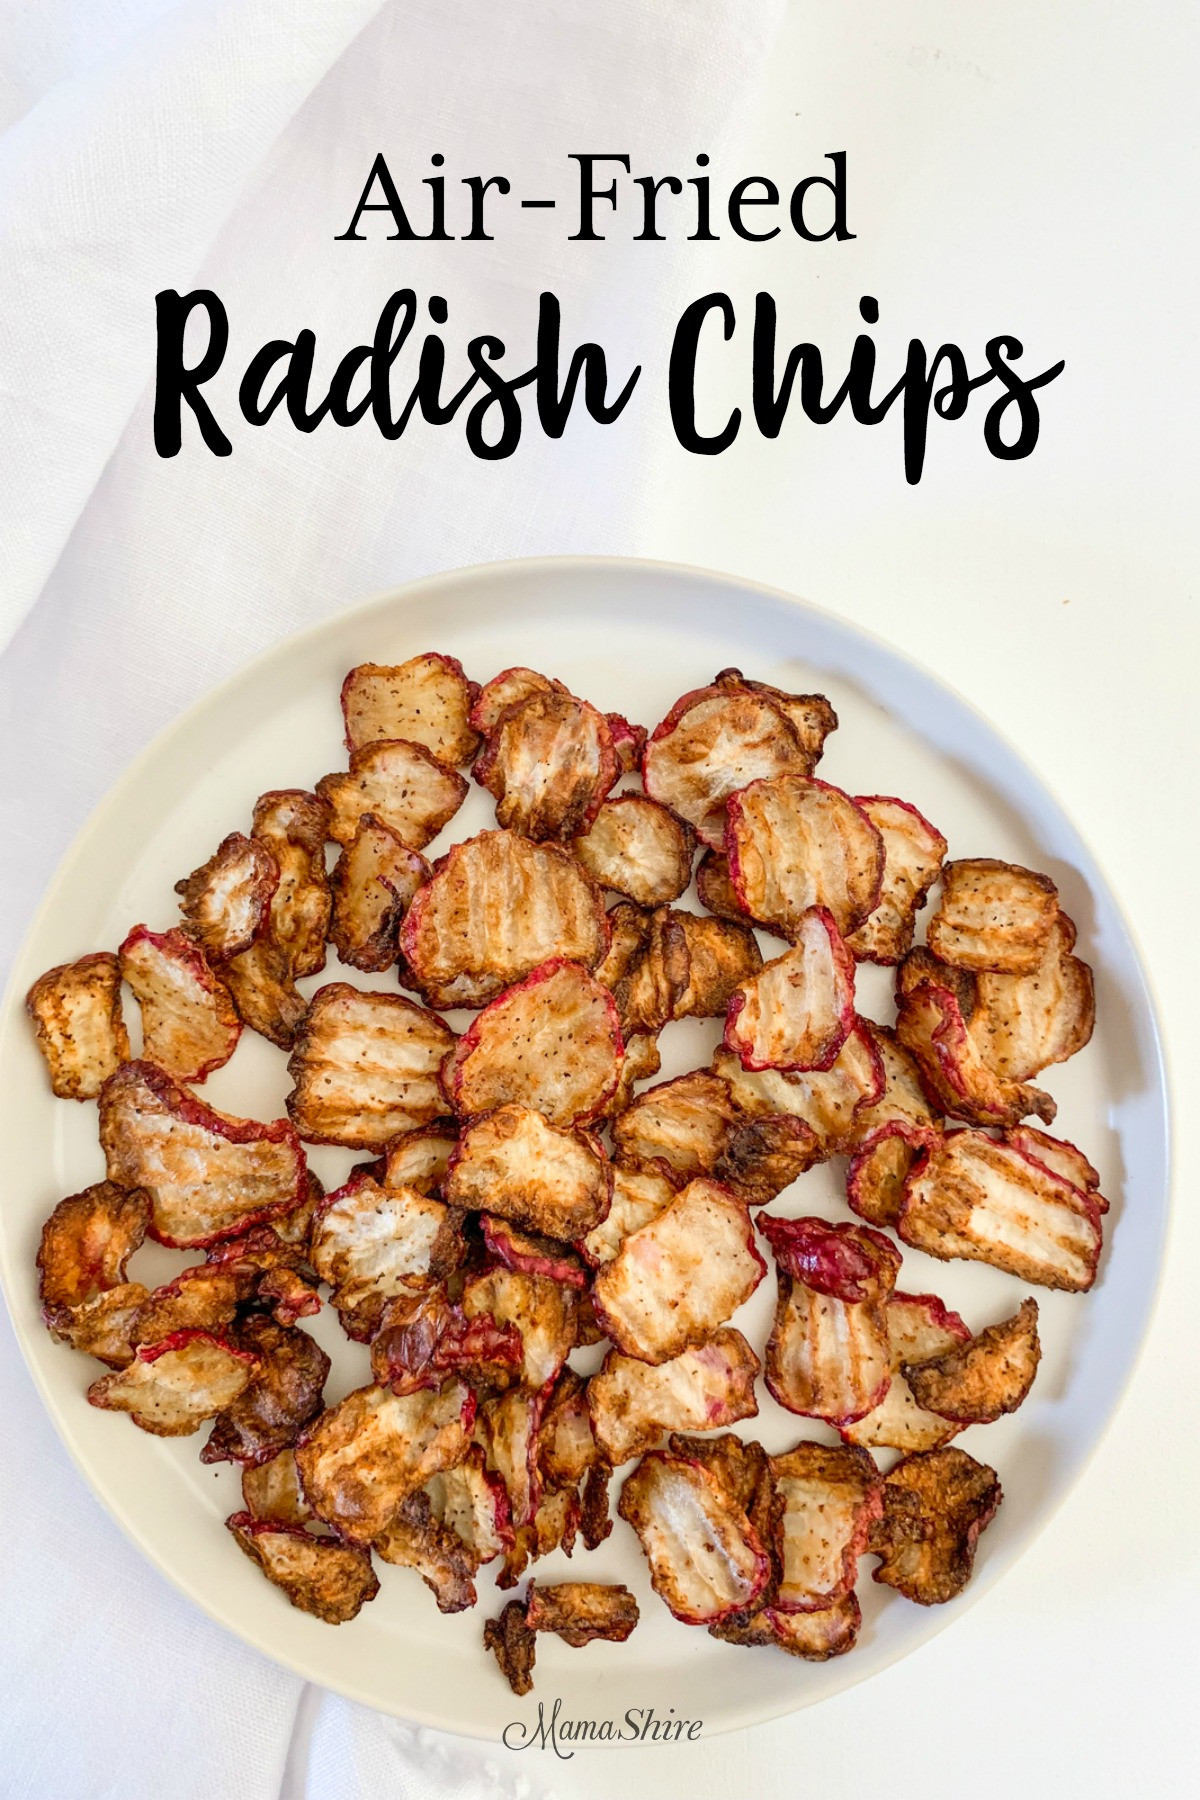 Low Carb Air Fryer Recipes
 Low Carb Keto Air Fryer Radish Chips MamaShire